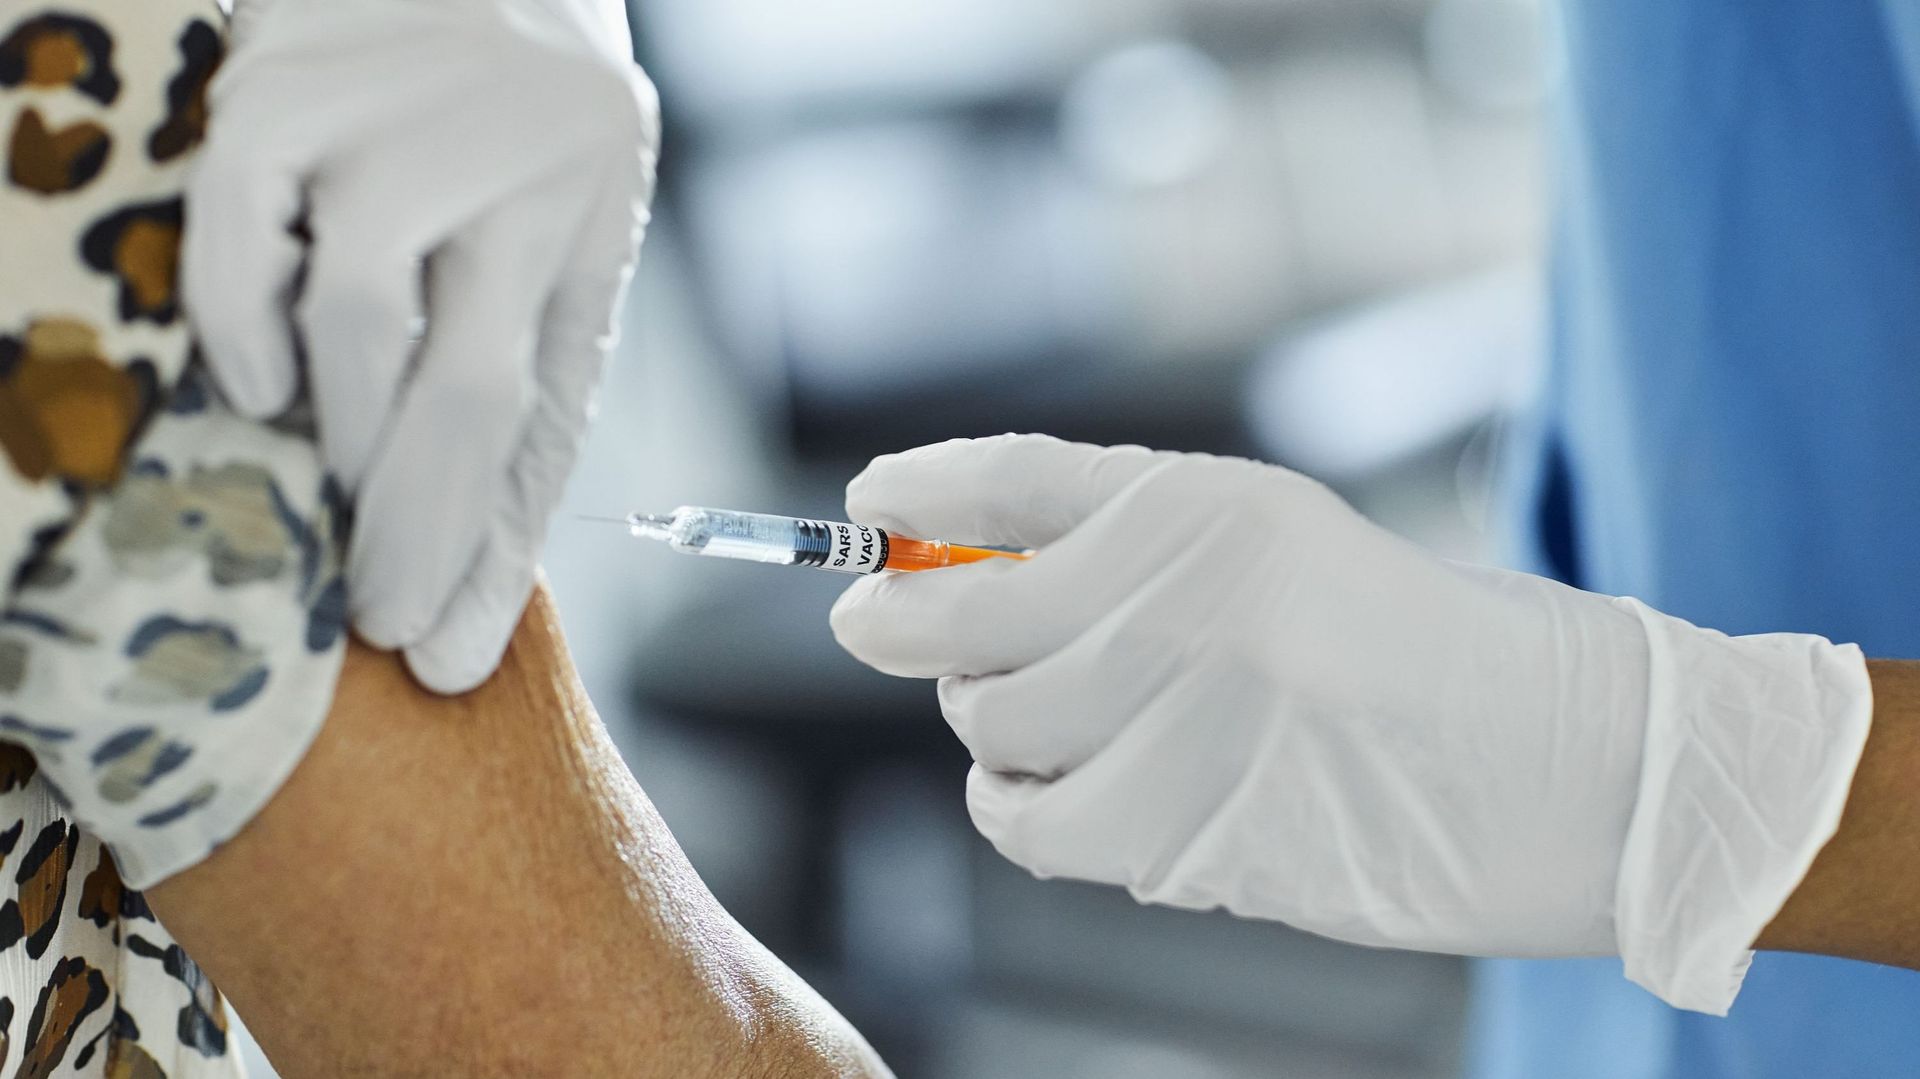 Spanish Hospital Administers Some Of The Country&#39 ; s First Covid-19 Vaccination Shots